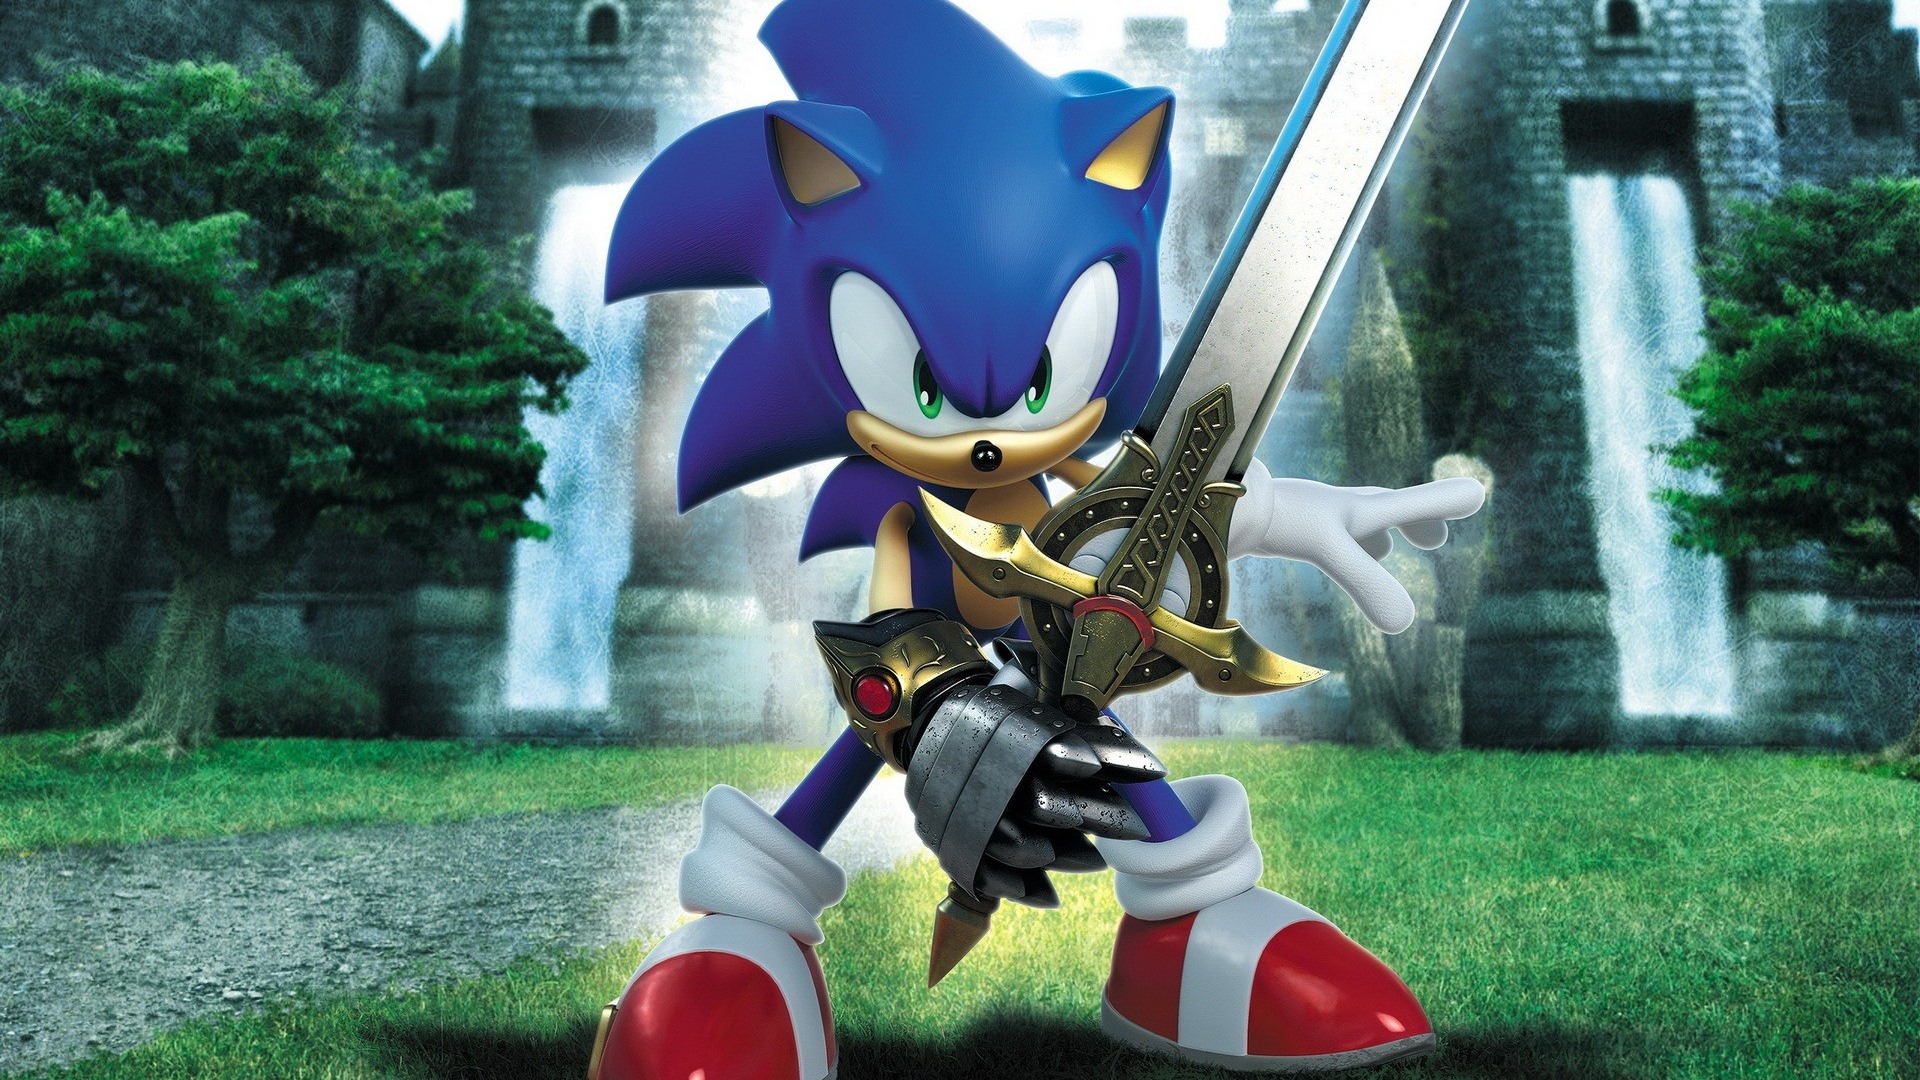 Sonic HD wallpapers #14 - 1920x1080